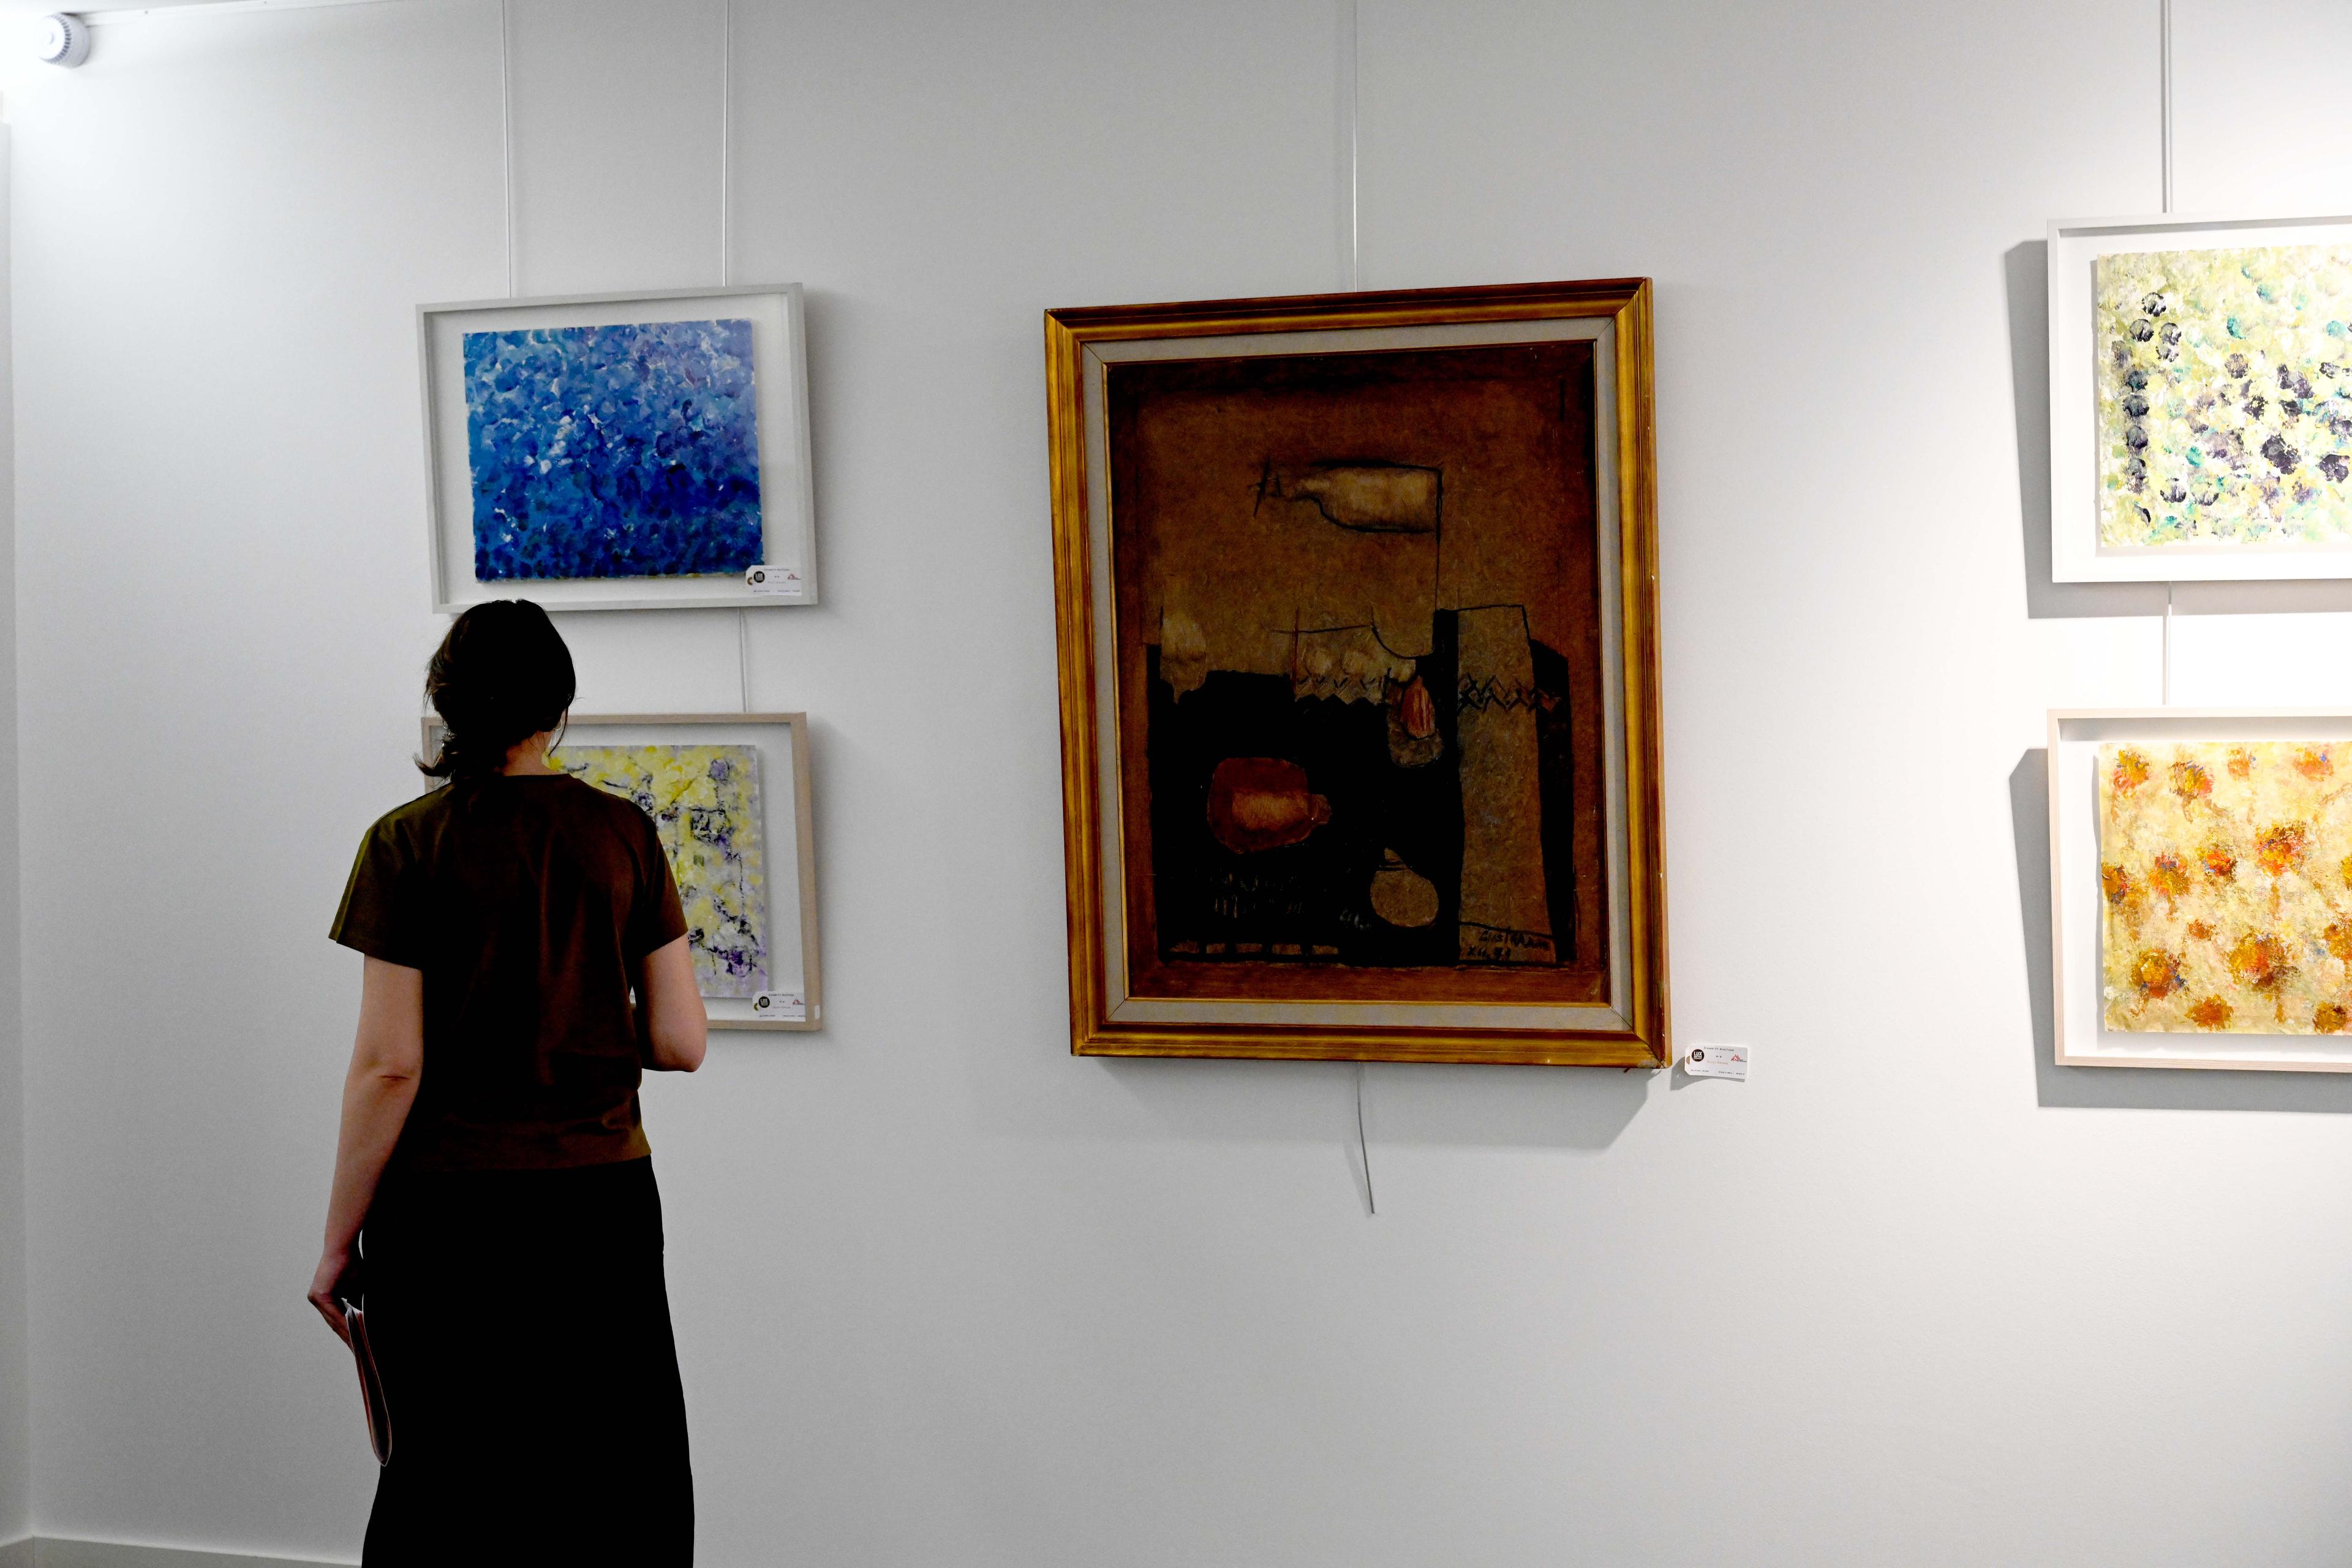 Attendees had the opportunity to admire the artworks prior to the auction. April 24,2022 